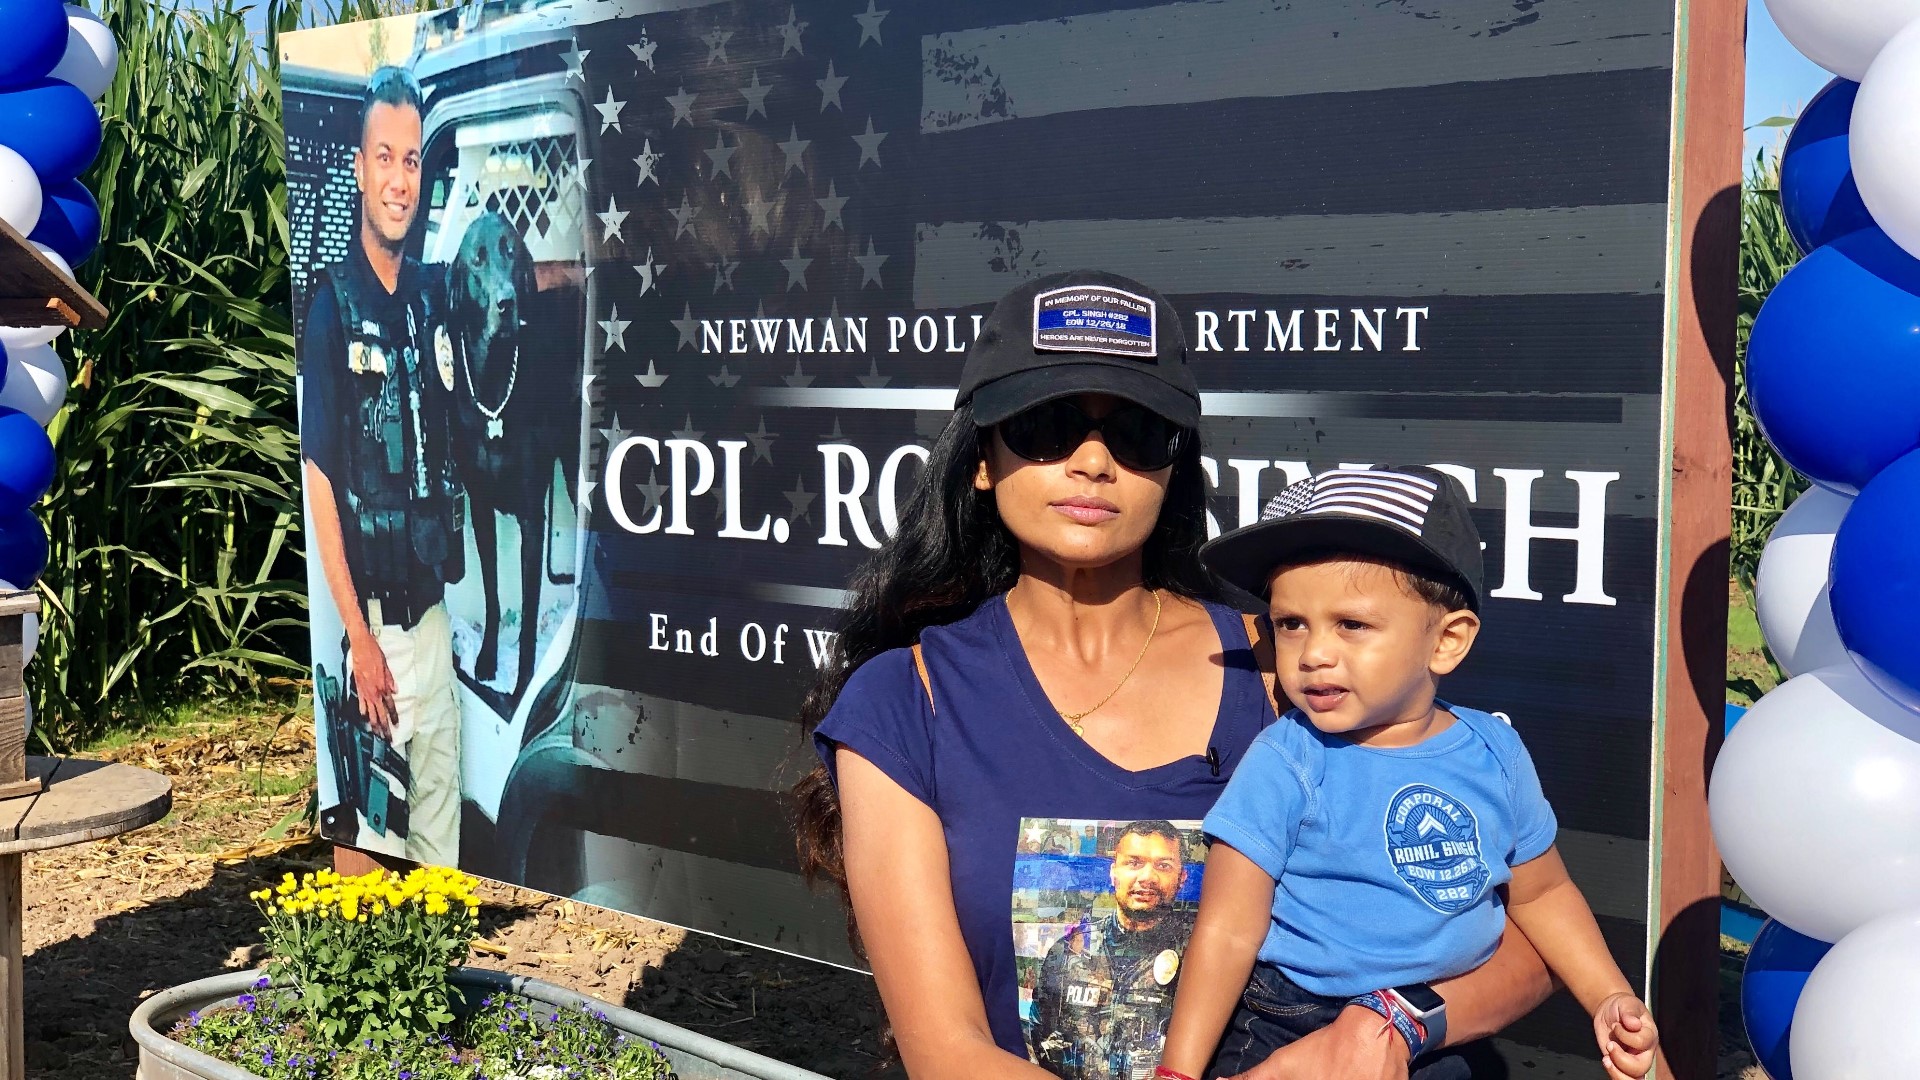 A honorary corn maze continued the gesture of love and support that the family of Cpl. Ronil Singh continues to appreciate.